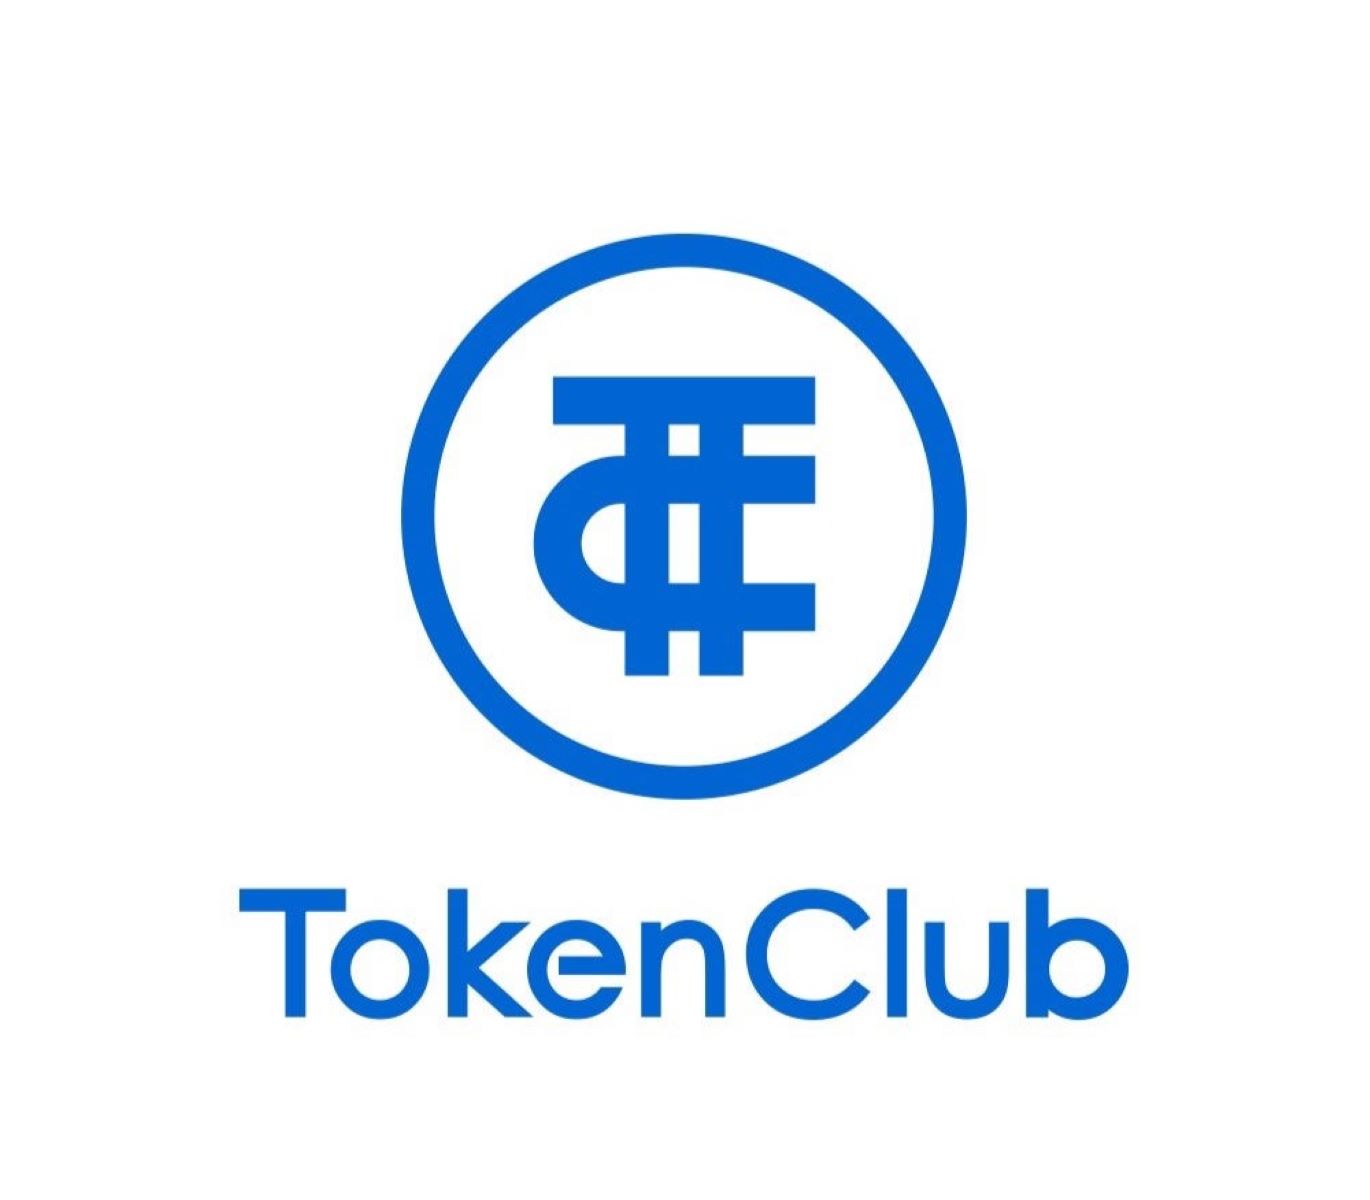 11-mind-blowing-facts-about-tokenclub-tct